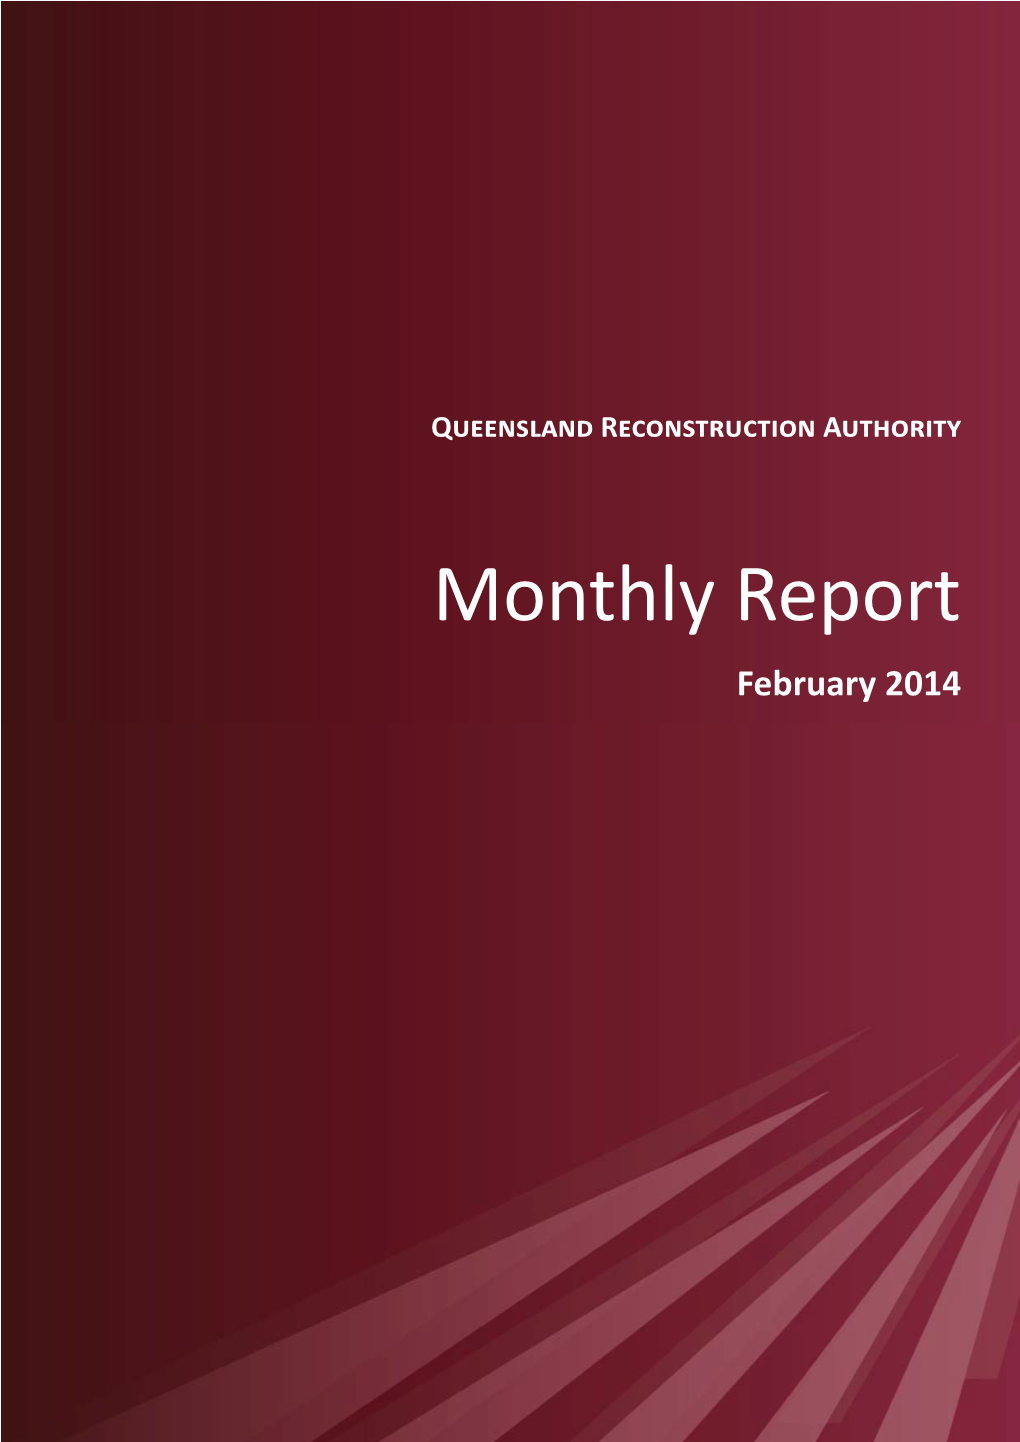 Monthly Report February 2014 FINAL